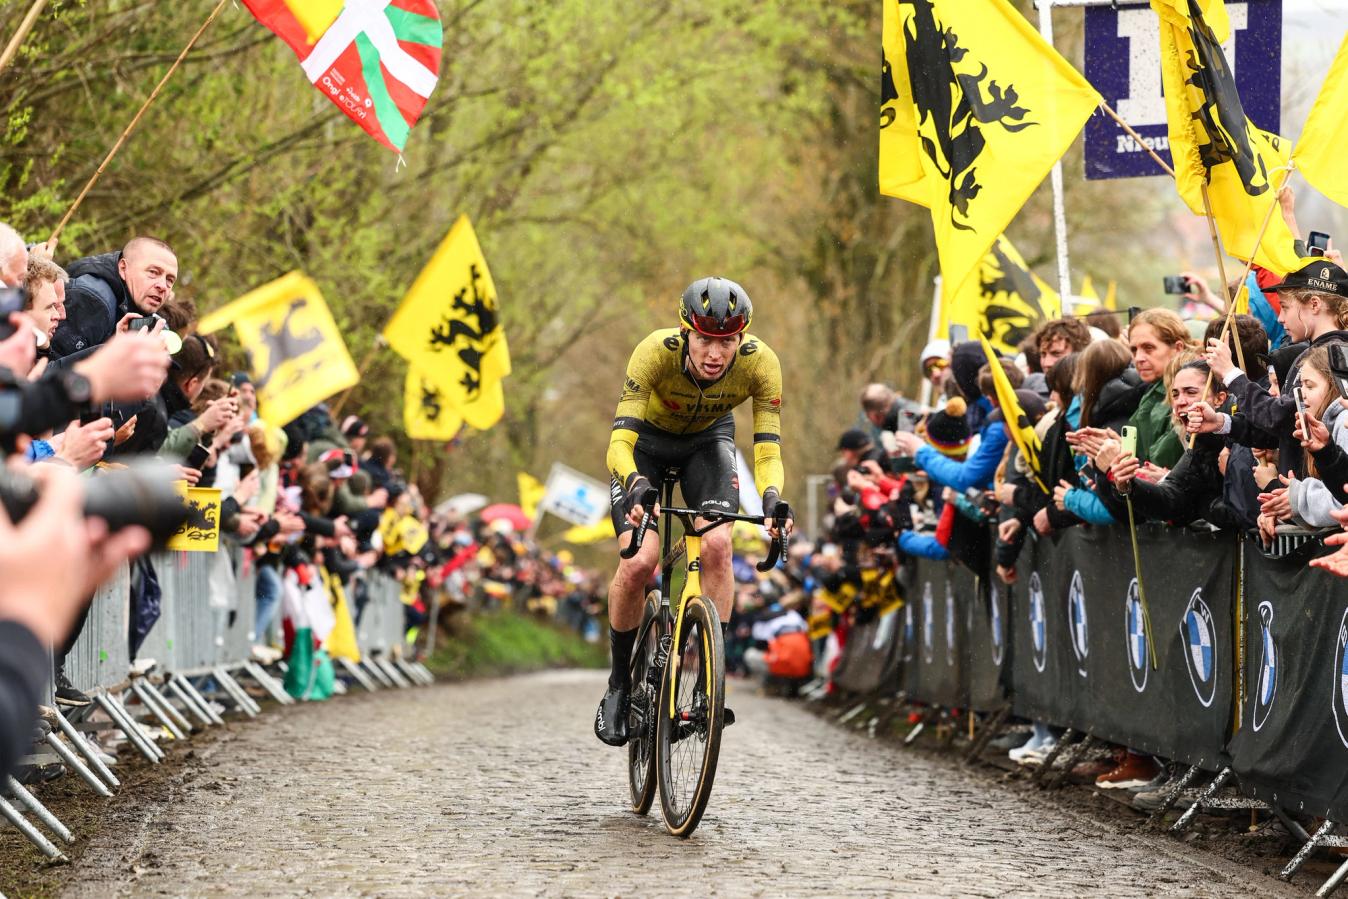 Matteo Jorgenson valiantly looked to close the gap to Mathieu van der Poel at the Tour of Flanders, but came up short and without any matches left to burn